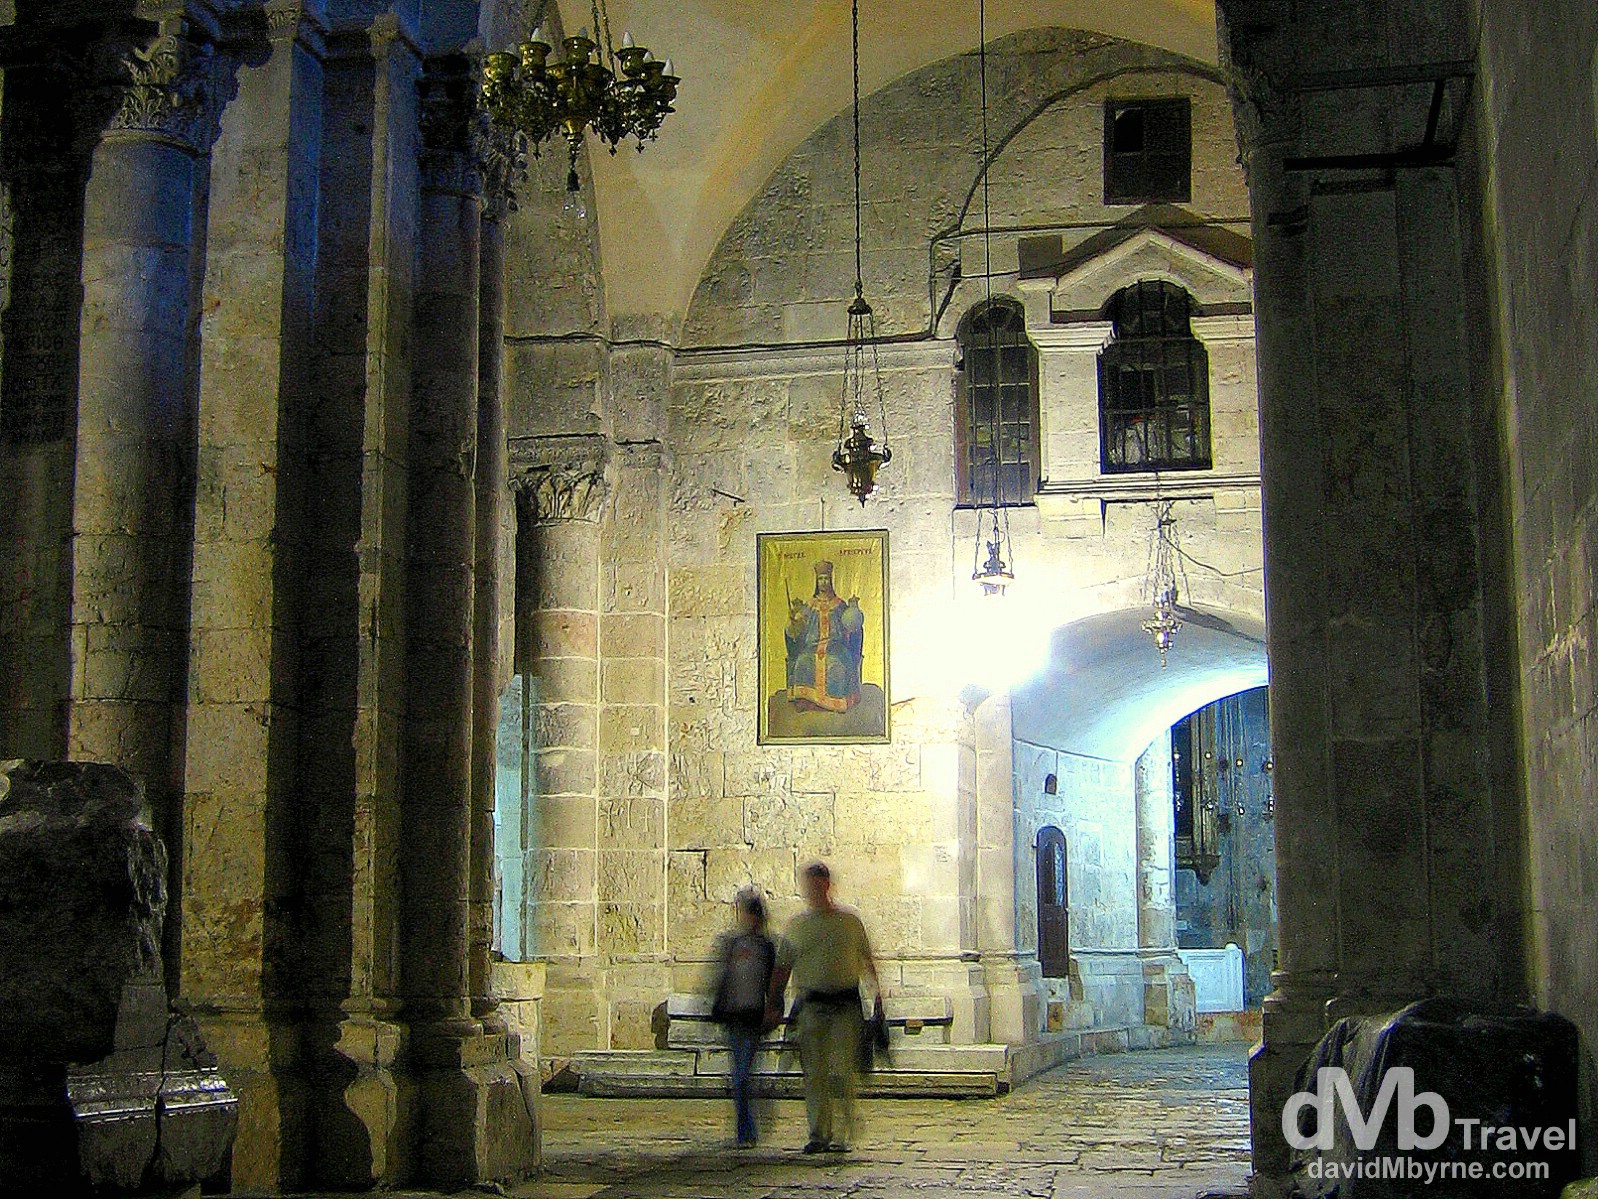 A section of the interior of the Church of the Holy Sepulchre, Old City, Jerusalem, Israel. May 2, 2008.